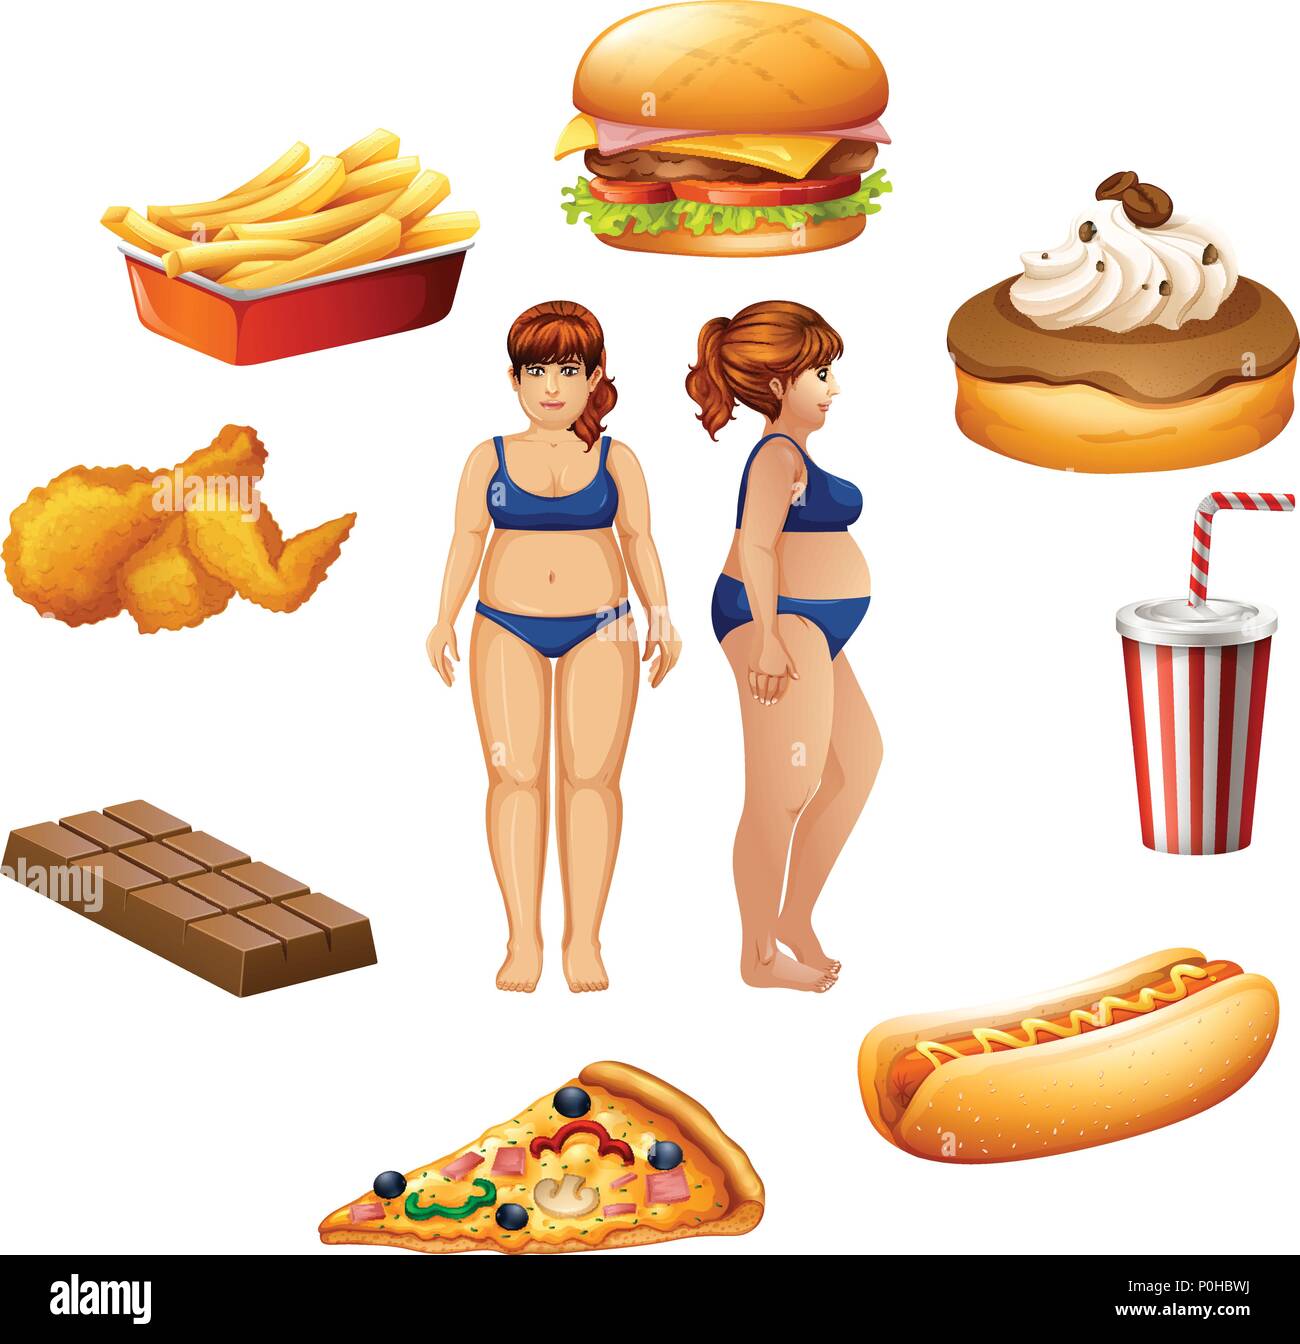 Overweight women with unhealthy food illustration Stock Vector